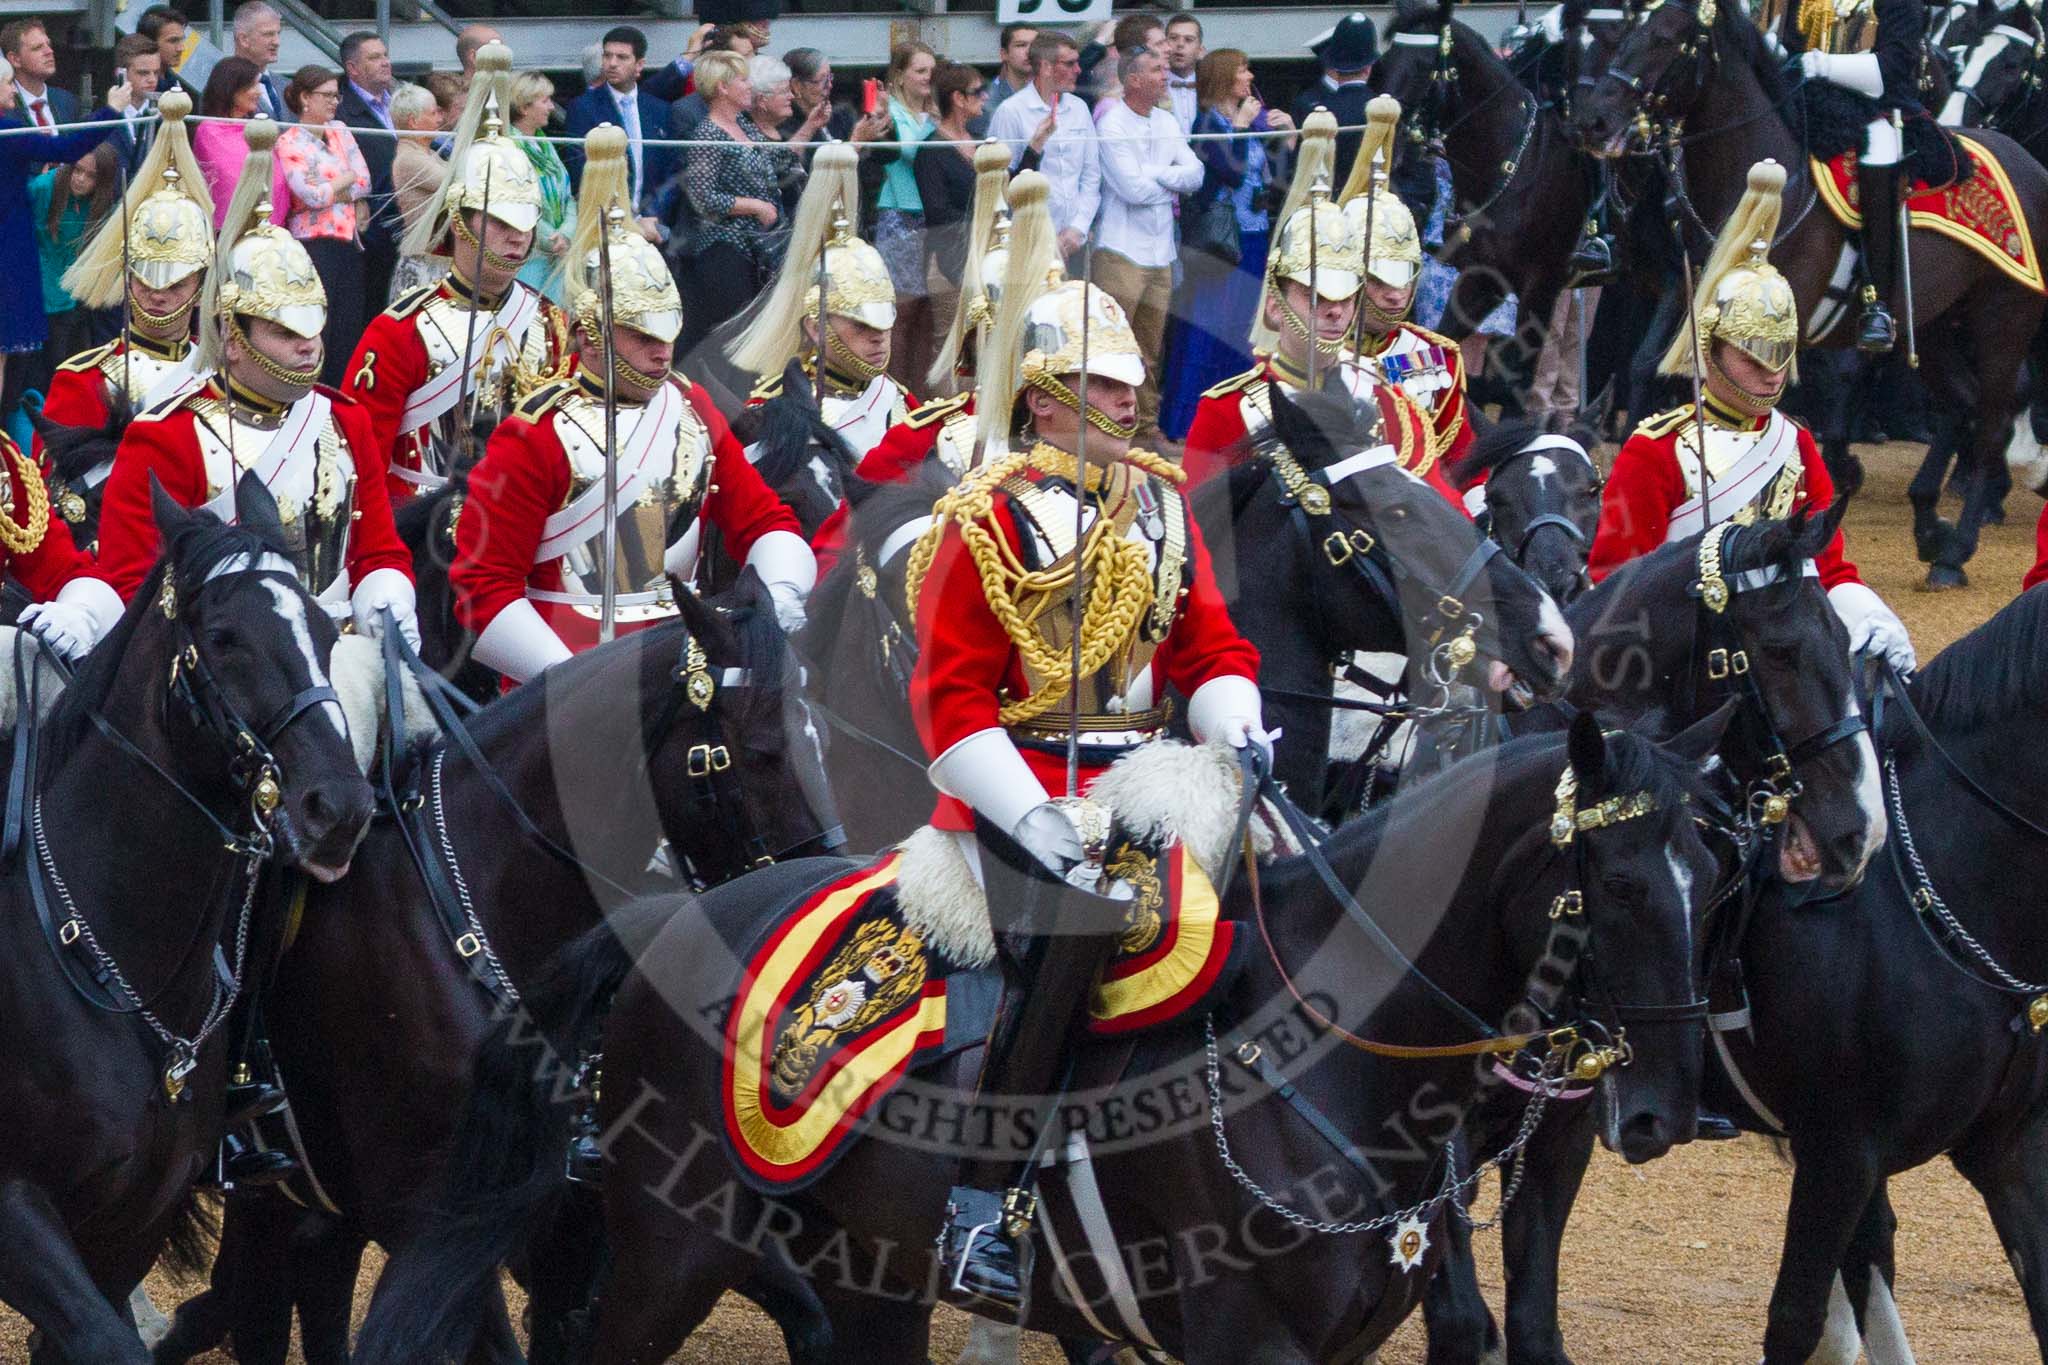 Trooping the Colour 2015. Image #597, 13 June 2015 11:58 Horse Guards Parade, London, UK